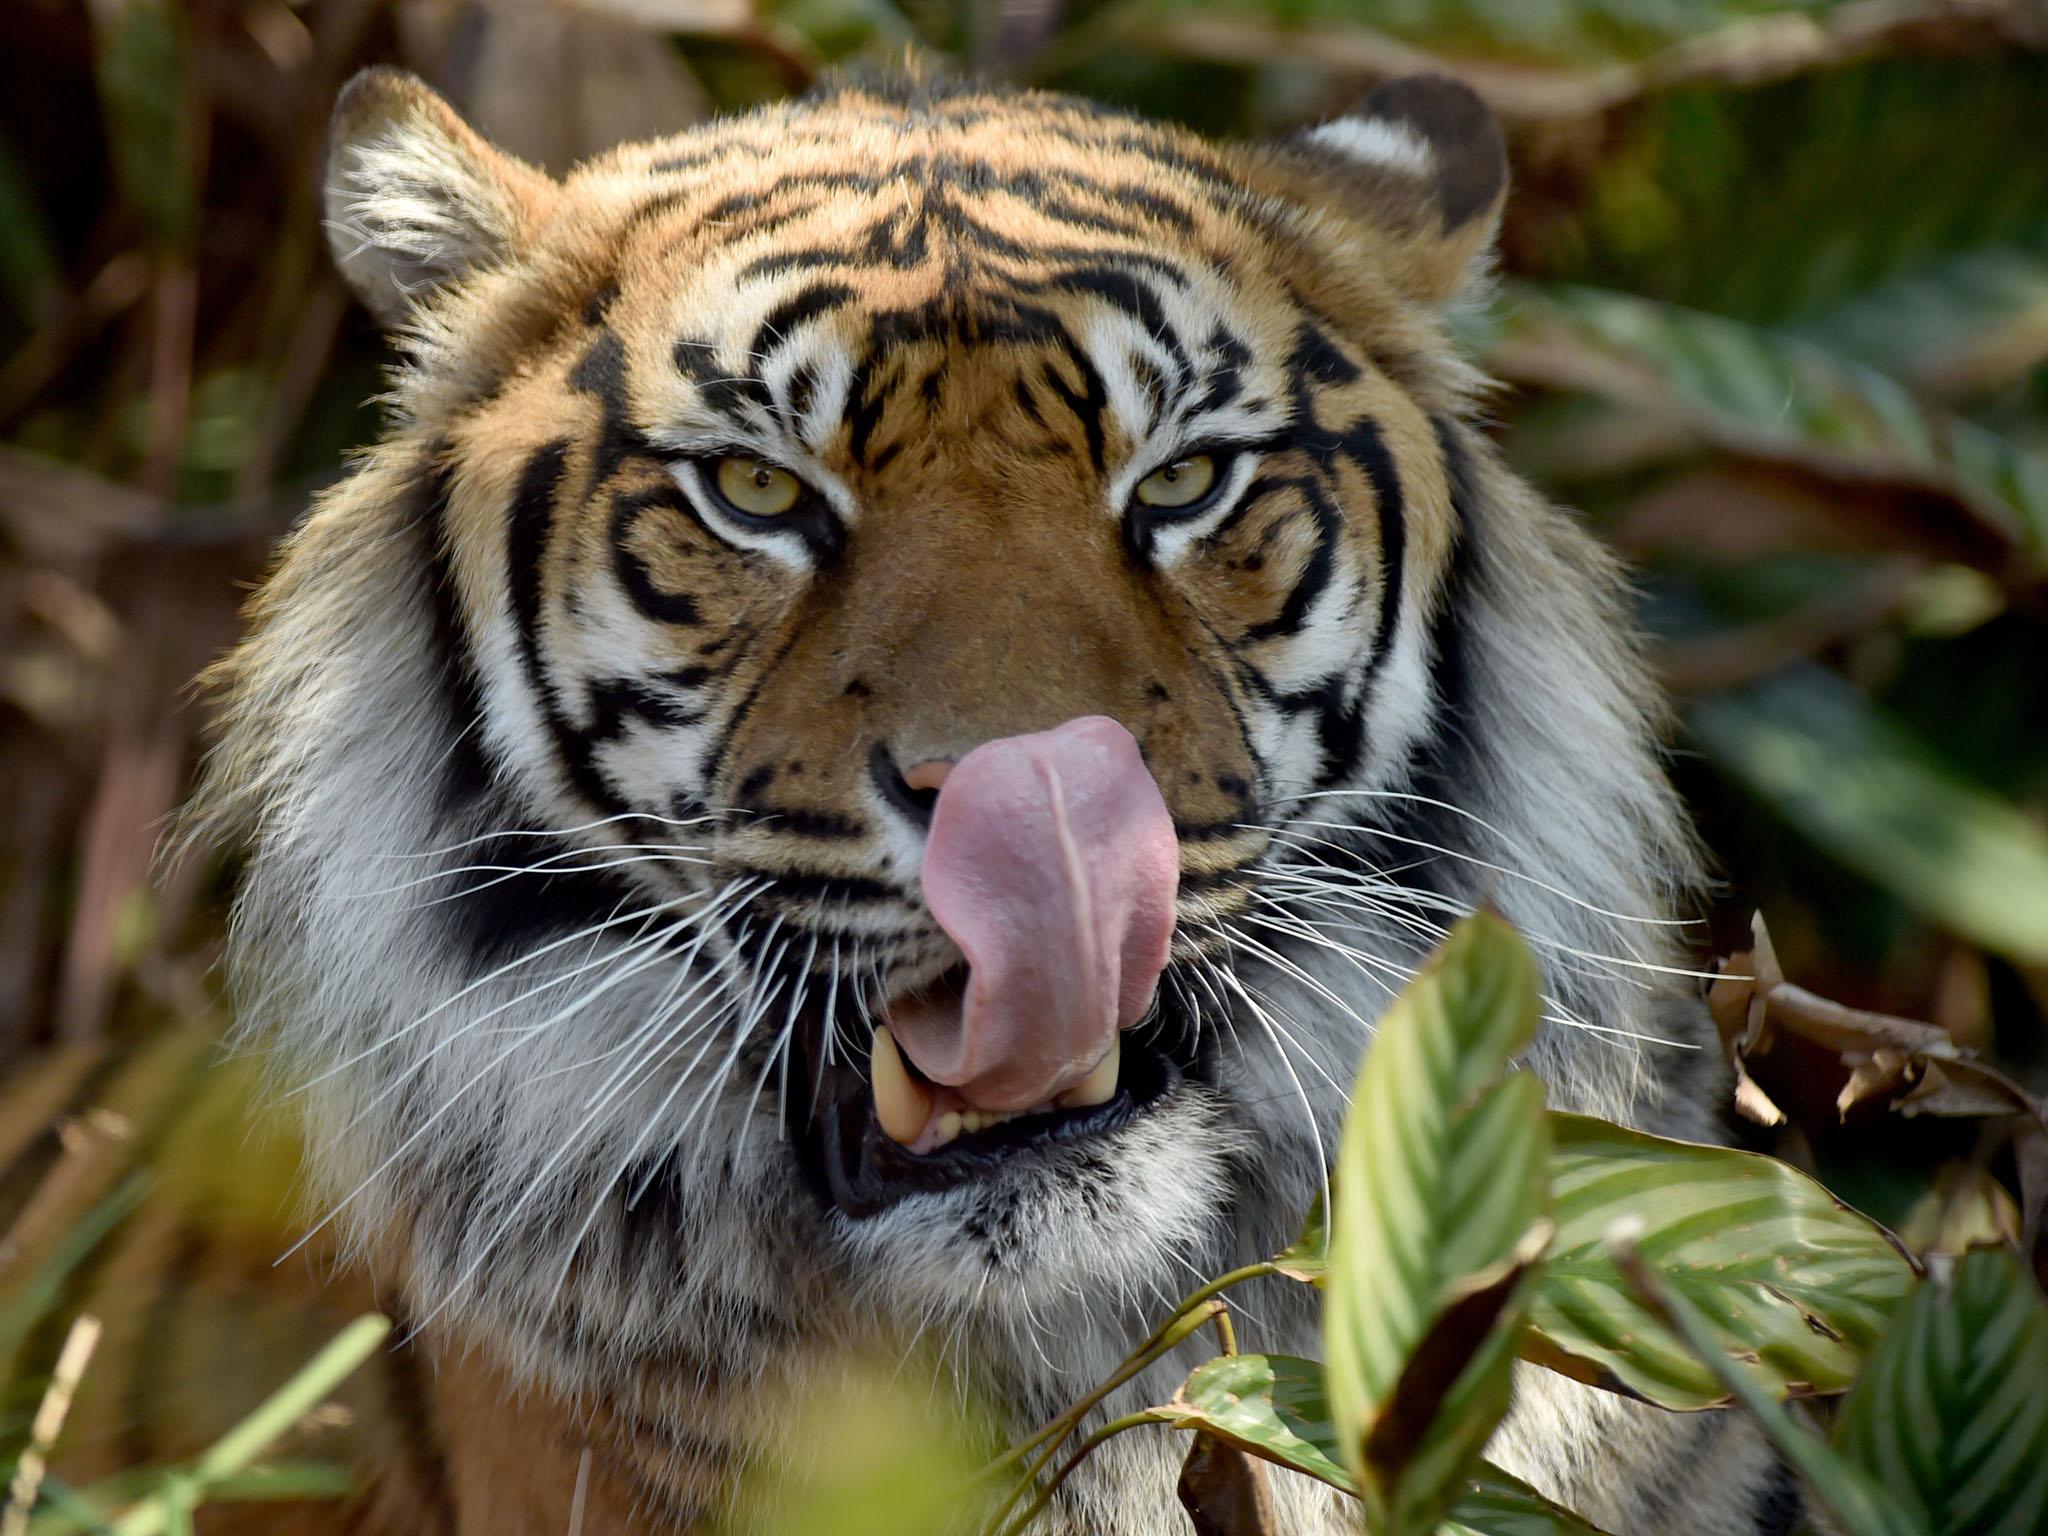 No one knows exactly how many Sumatran tigers remain, estimates range from about 400 to 500, down from 1,000 in 1978